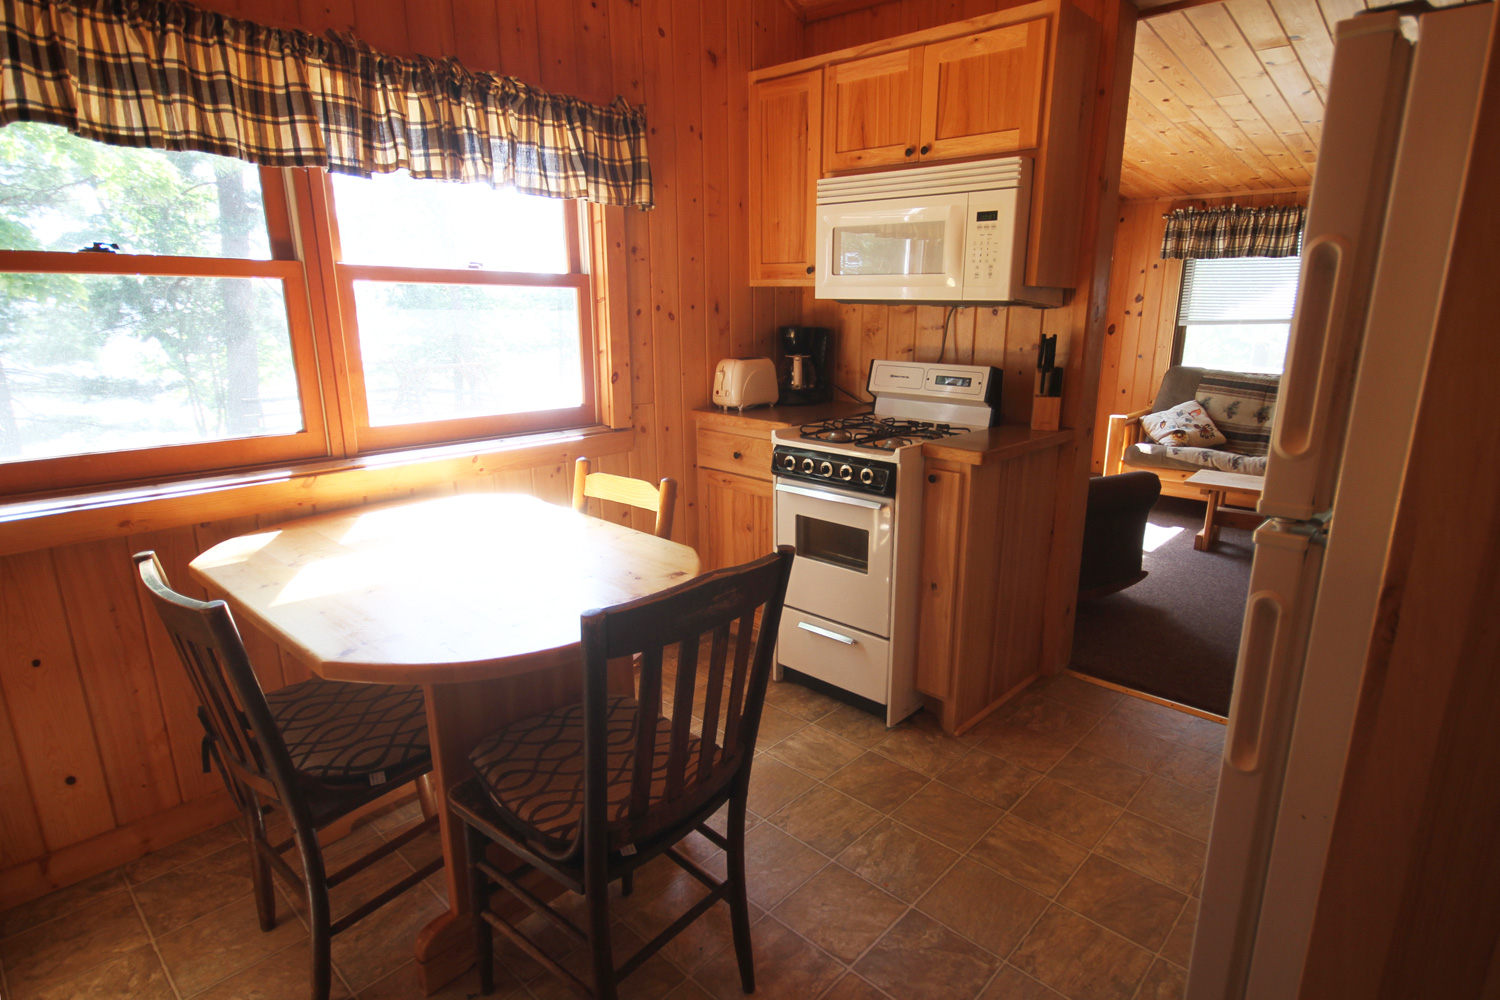 Centrally located Kitchen with a great view